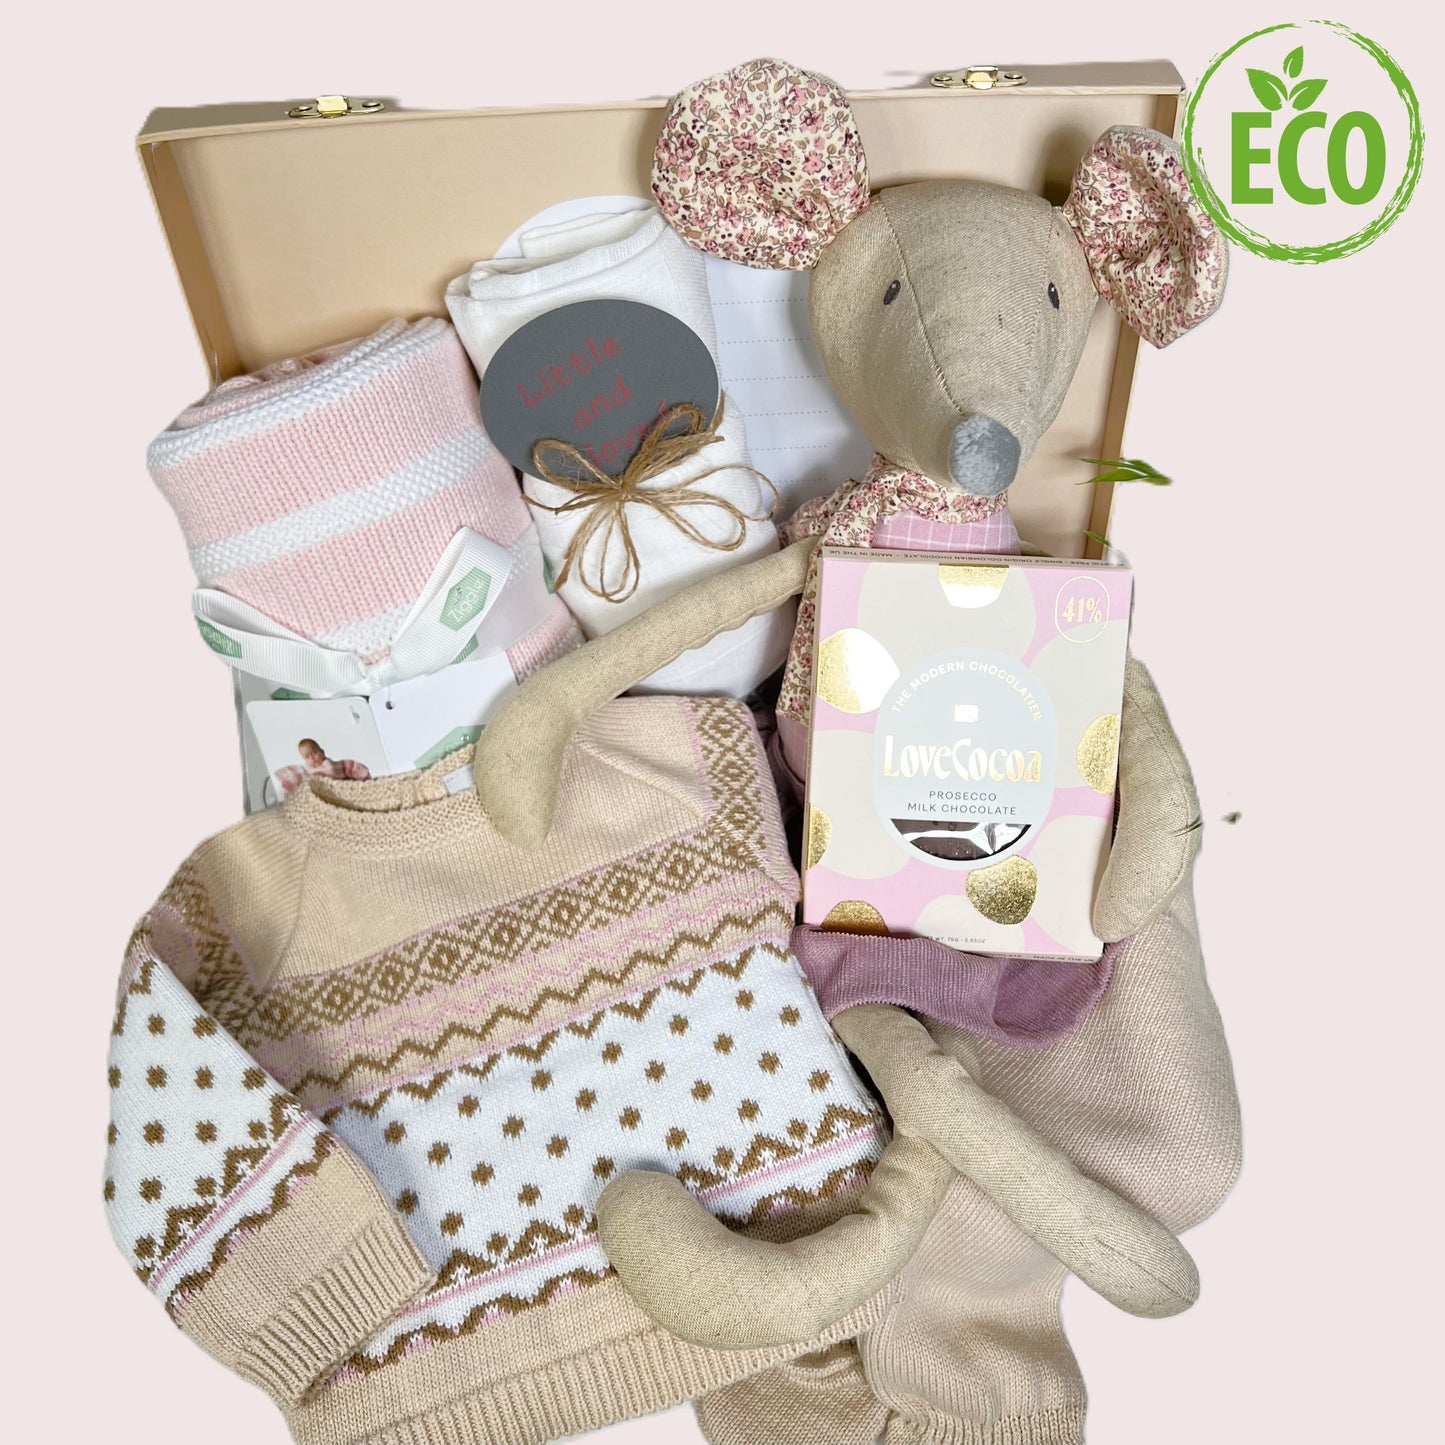 This baby girl gift contains a fine knit cotton Fair aisle 2 piece baby clothing set, a cotton baby blanket in pink and white stripes, a muslin sqaure, a bar of presecco chocolate, a photography disc and a large linen mouse toy.